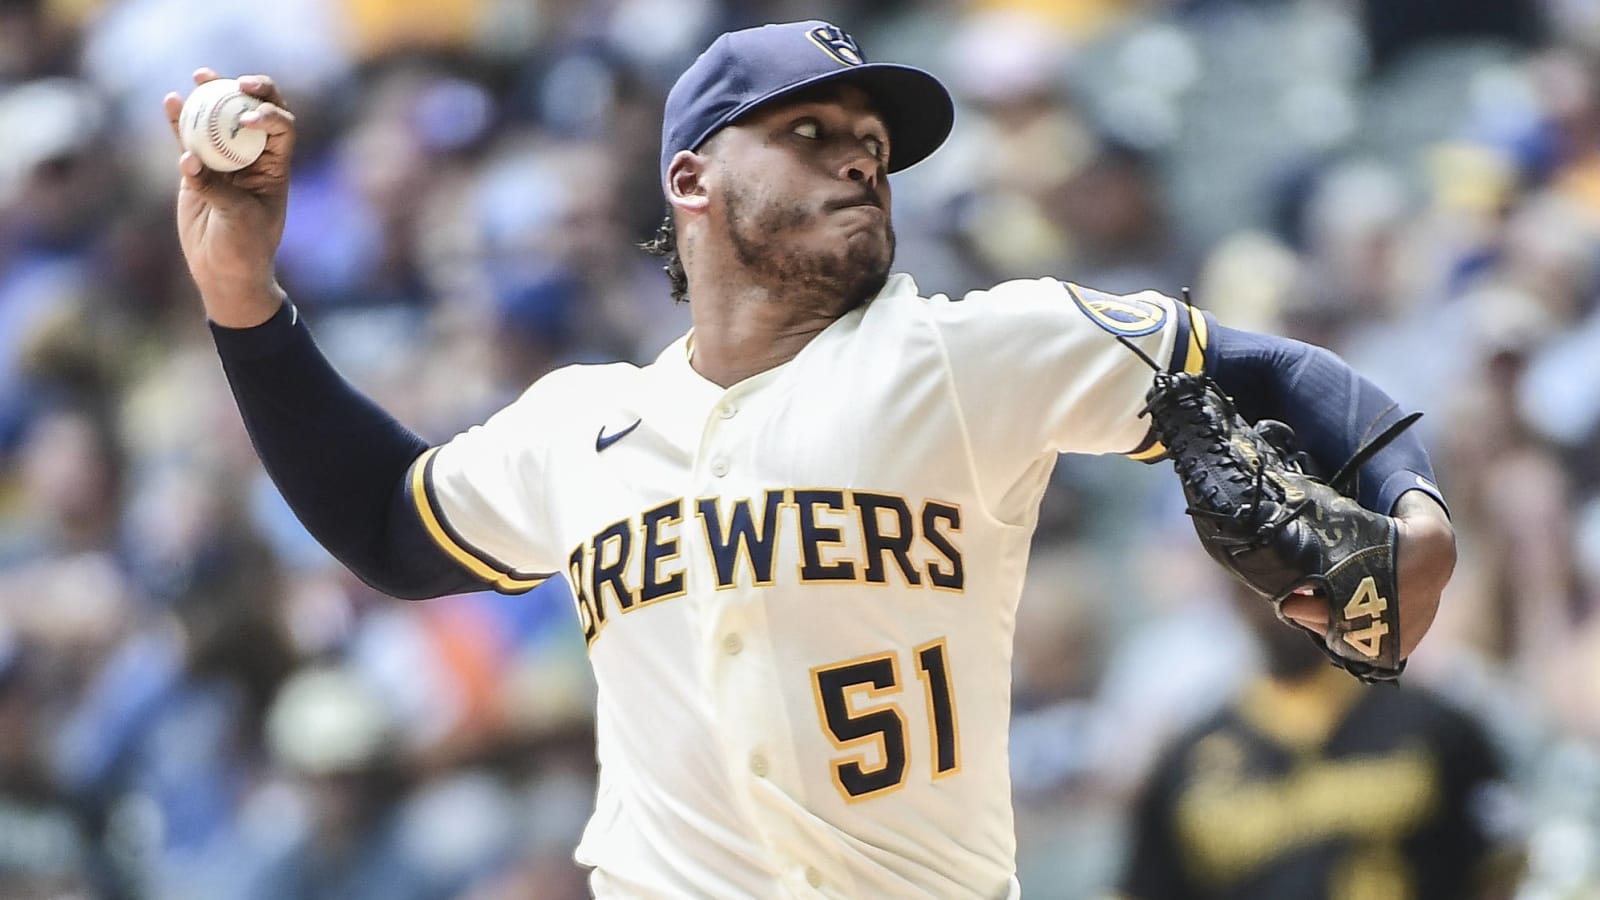 Brewers All-Star SP Freddy Peralta headed to IL with shoulder